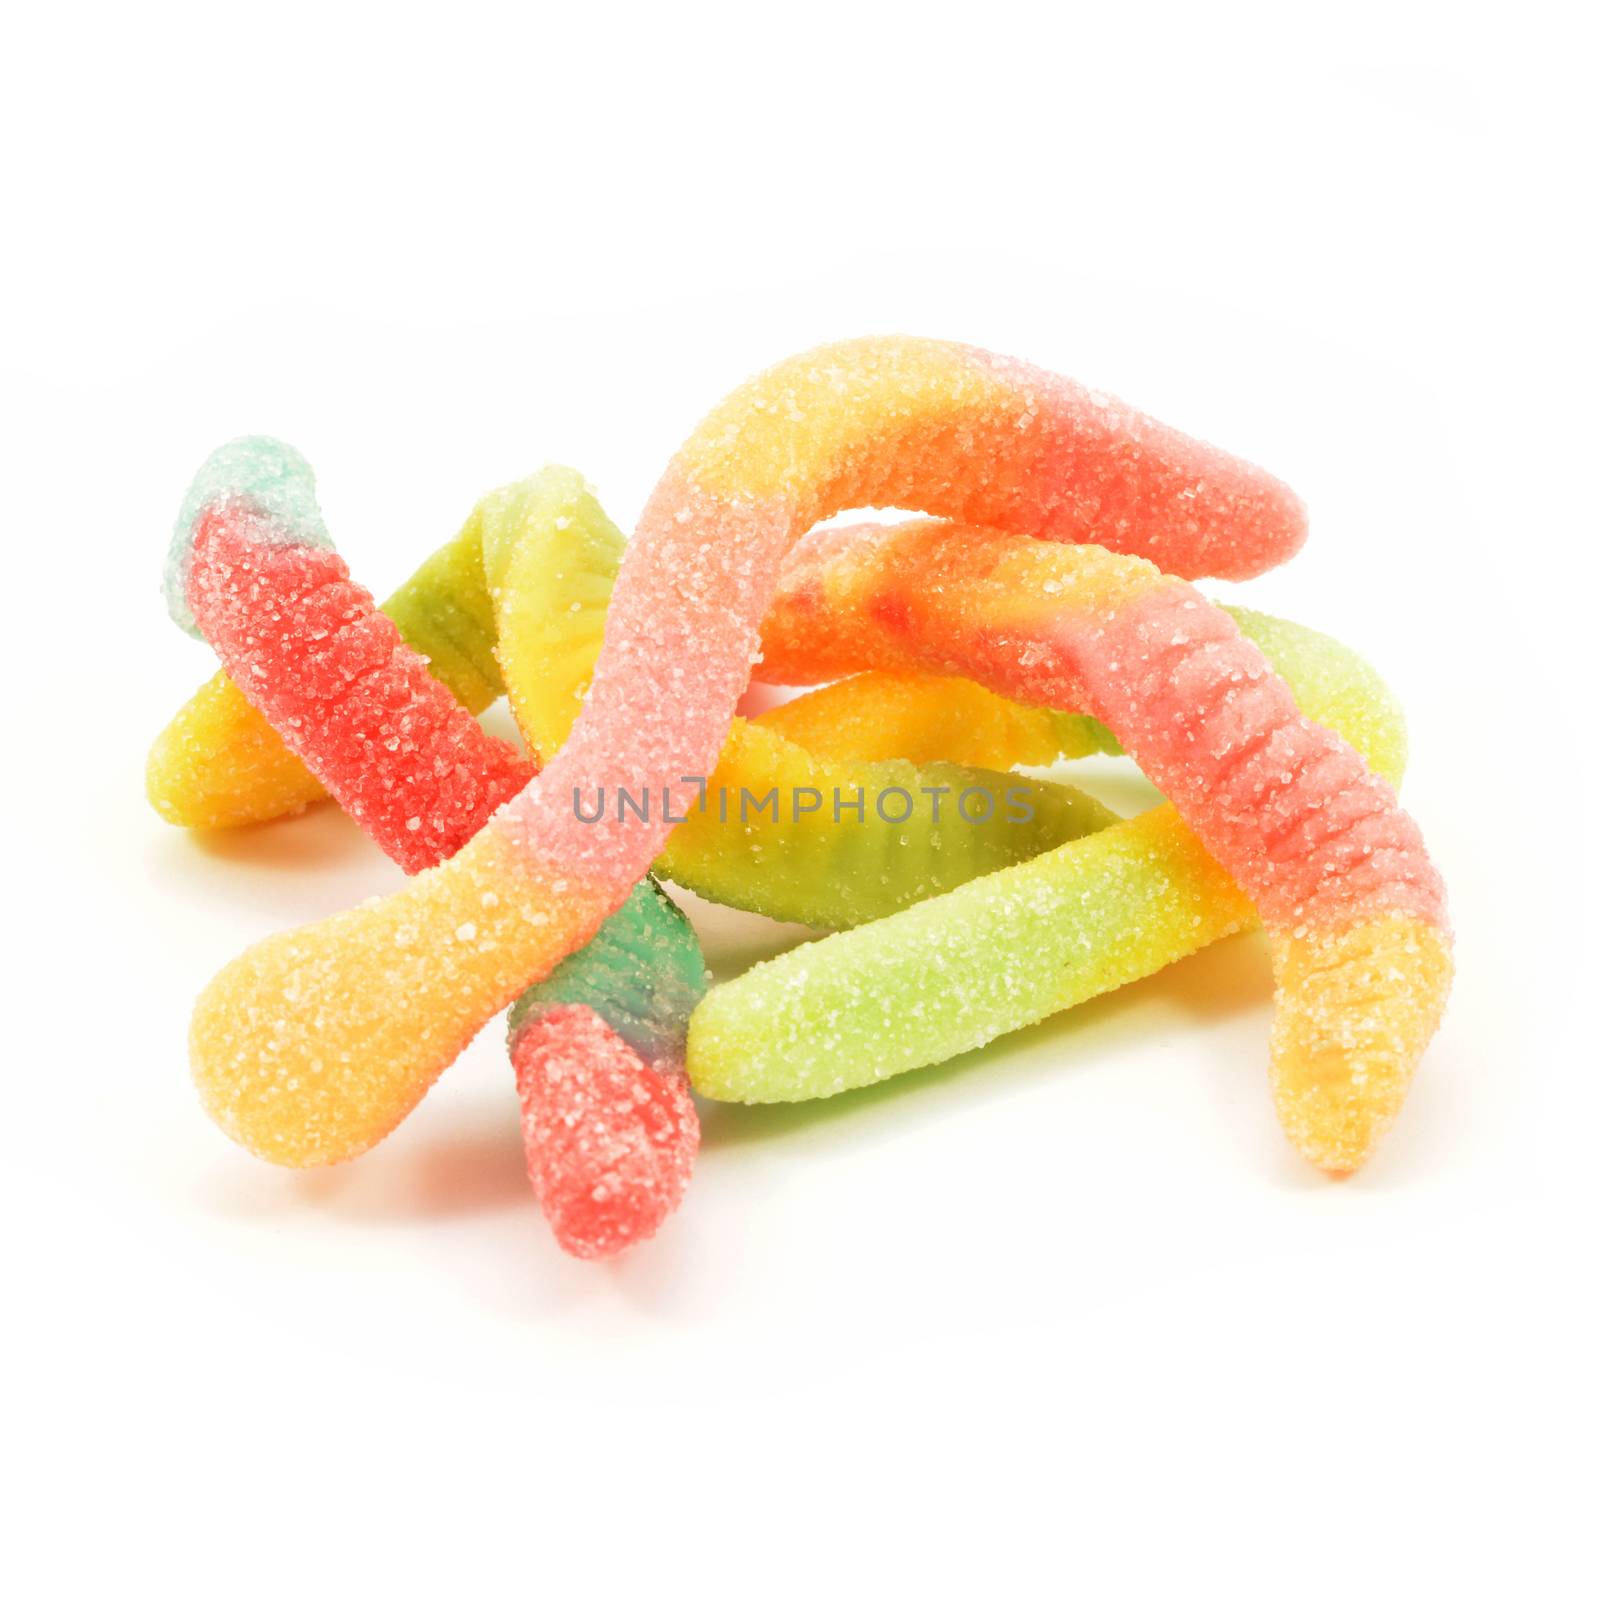 An isolated bunch of sour gummy worm candy over a white background.